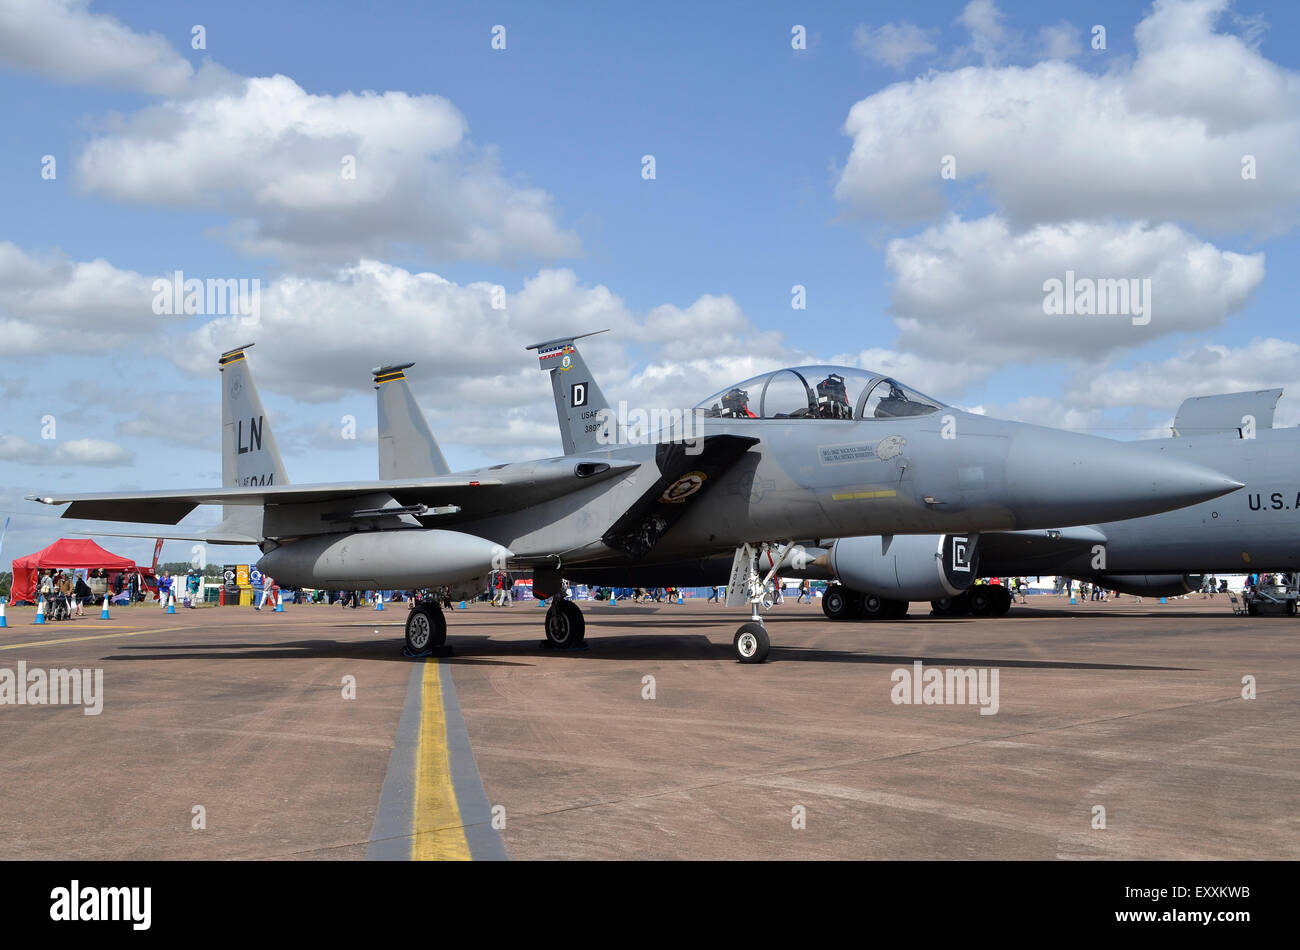 F-15C Eagle of the US Air Force on display at RIAT 2015, Fairford, UK. Credit:  Antony Nettle/Alamy Live News Stock Photo